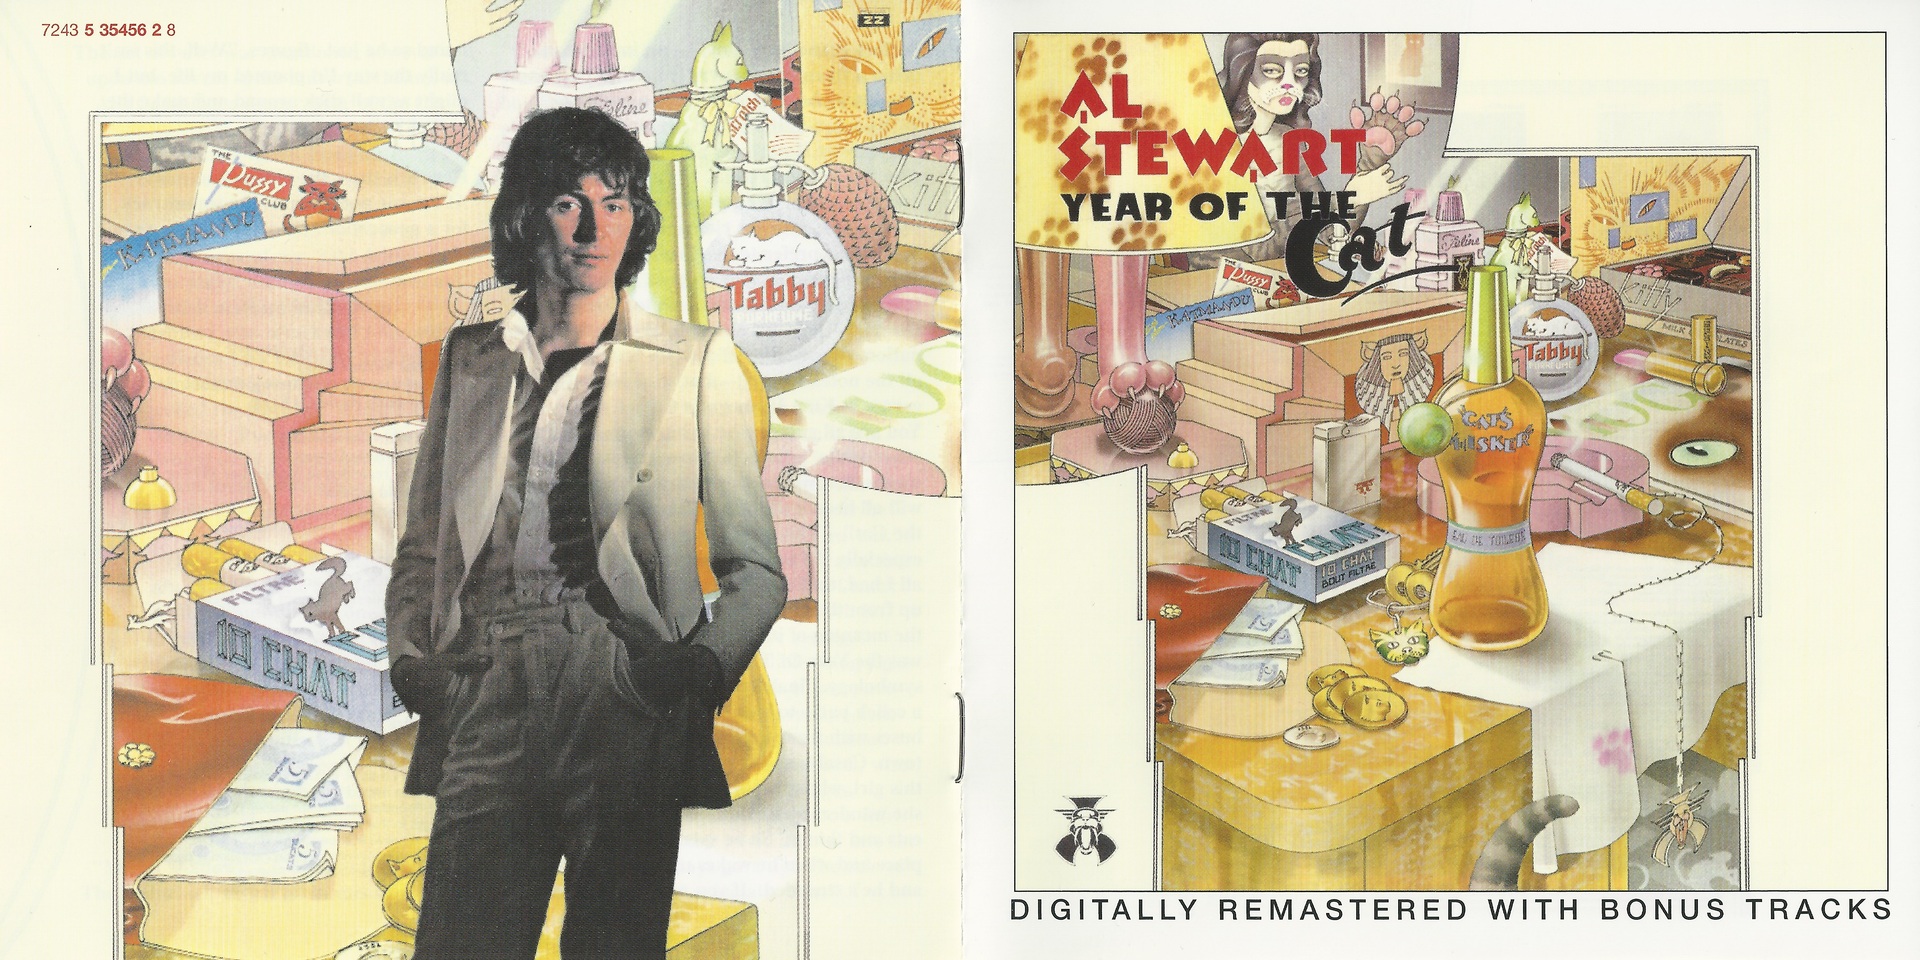 al stewart the year of the cat full album mp3 free download